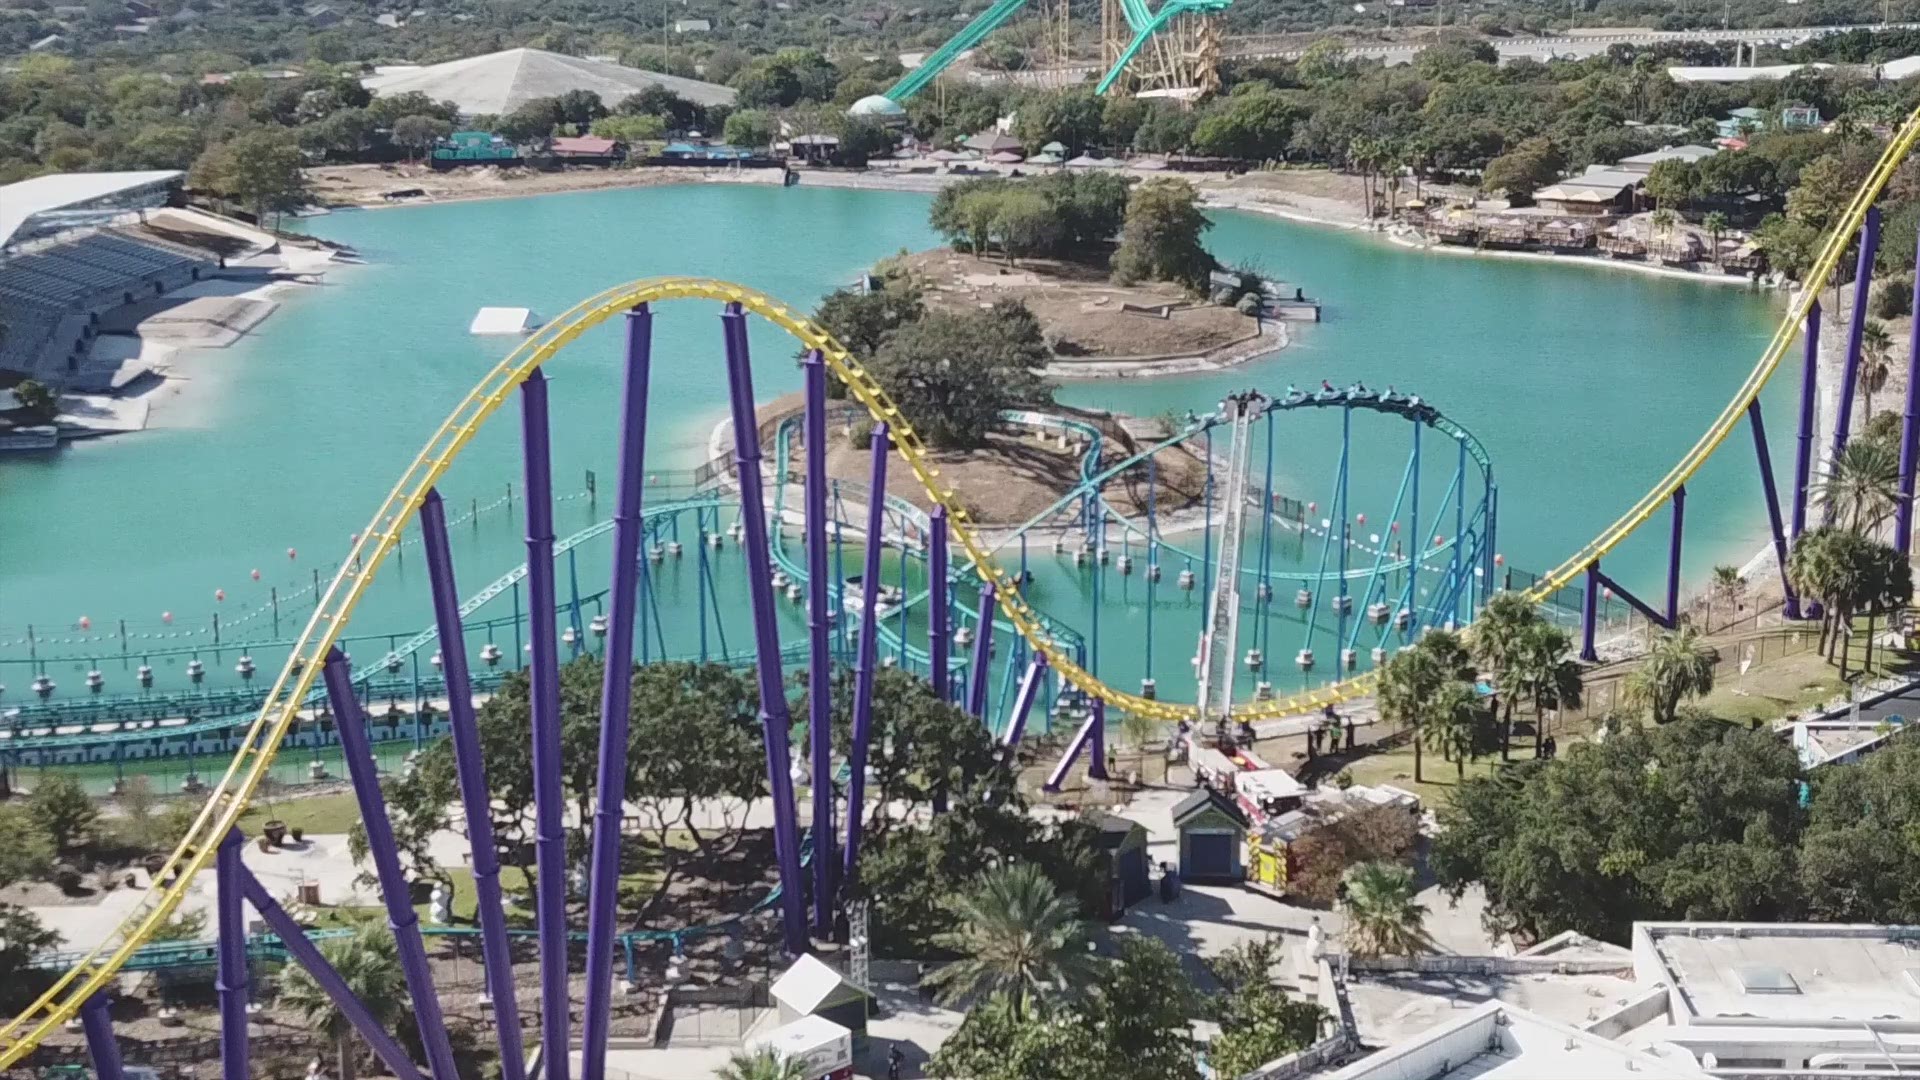 The Wave Breaker coaster appears to have stalled at its peak over the water, which SeaWorld says is 61 feet high.